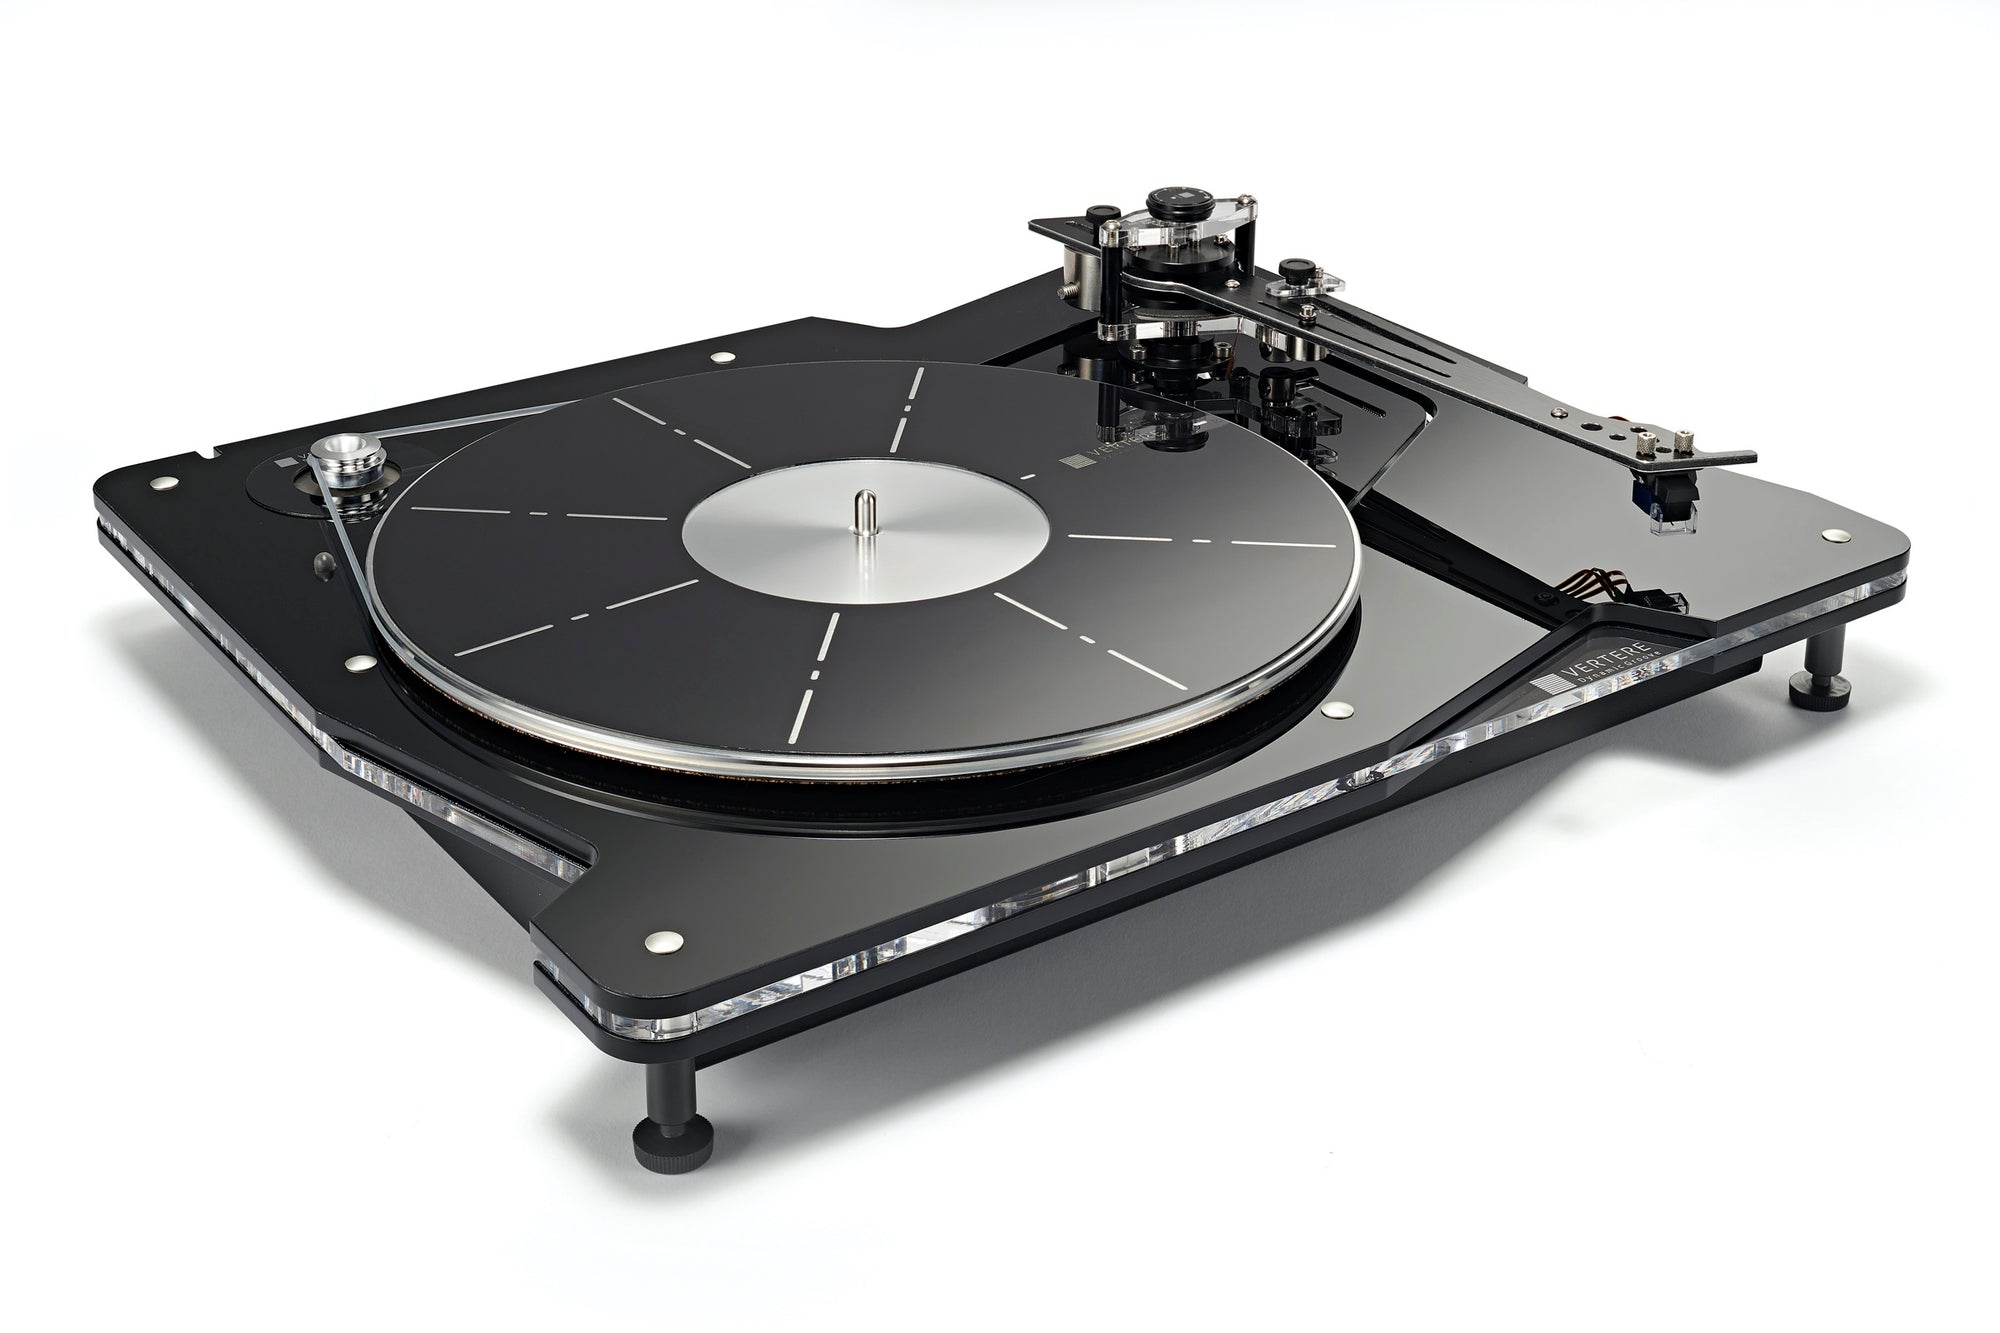 New Product: Award-Winning Vertere Acoustics DG-1 Dynamic Groove Record Player